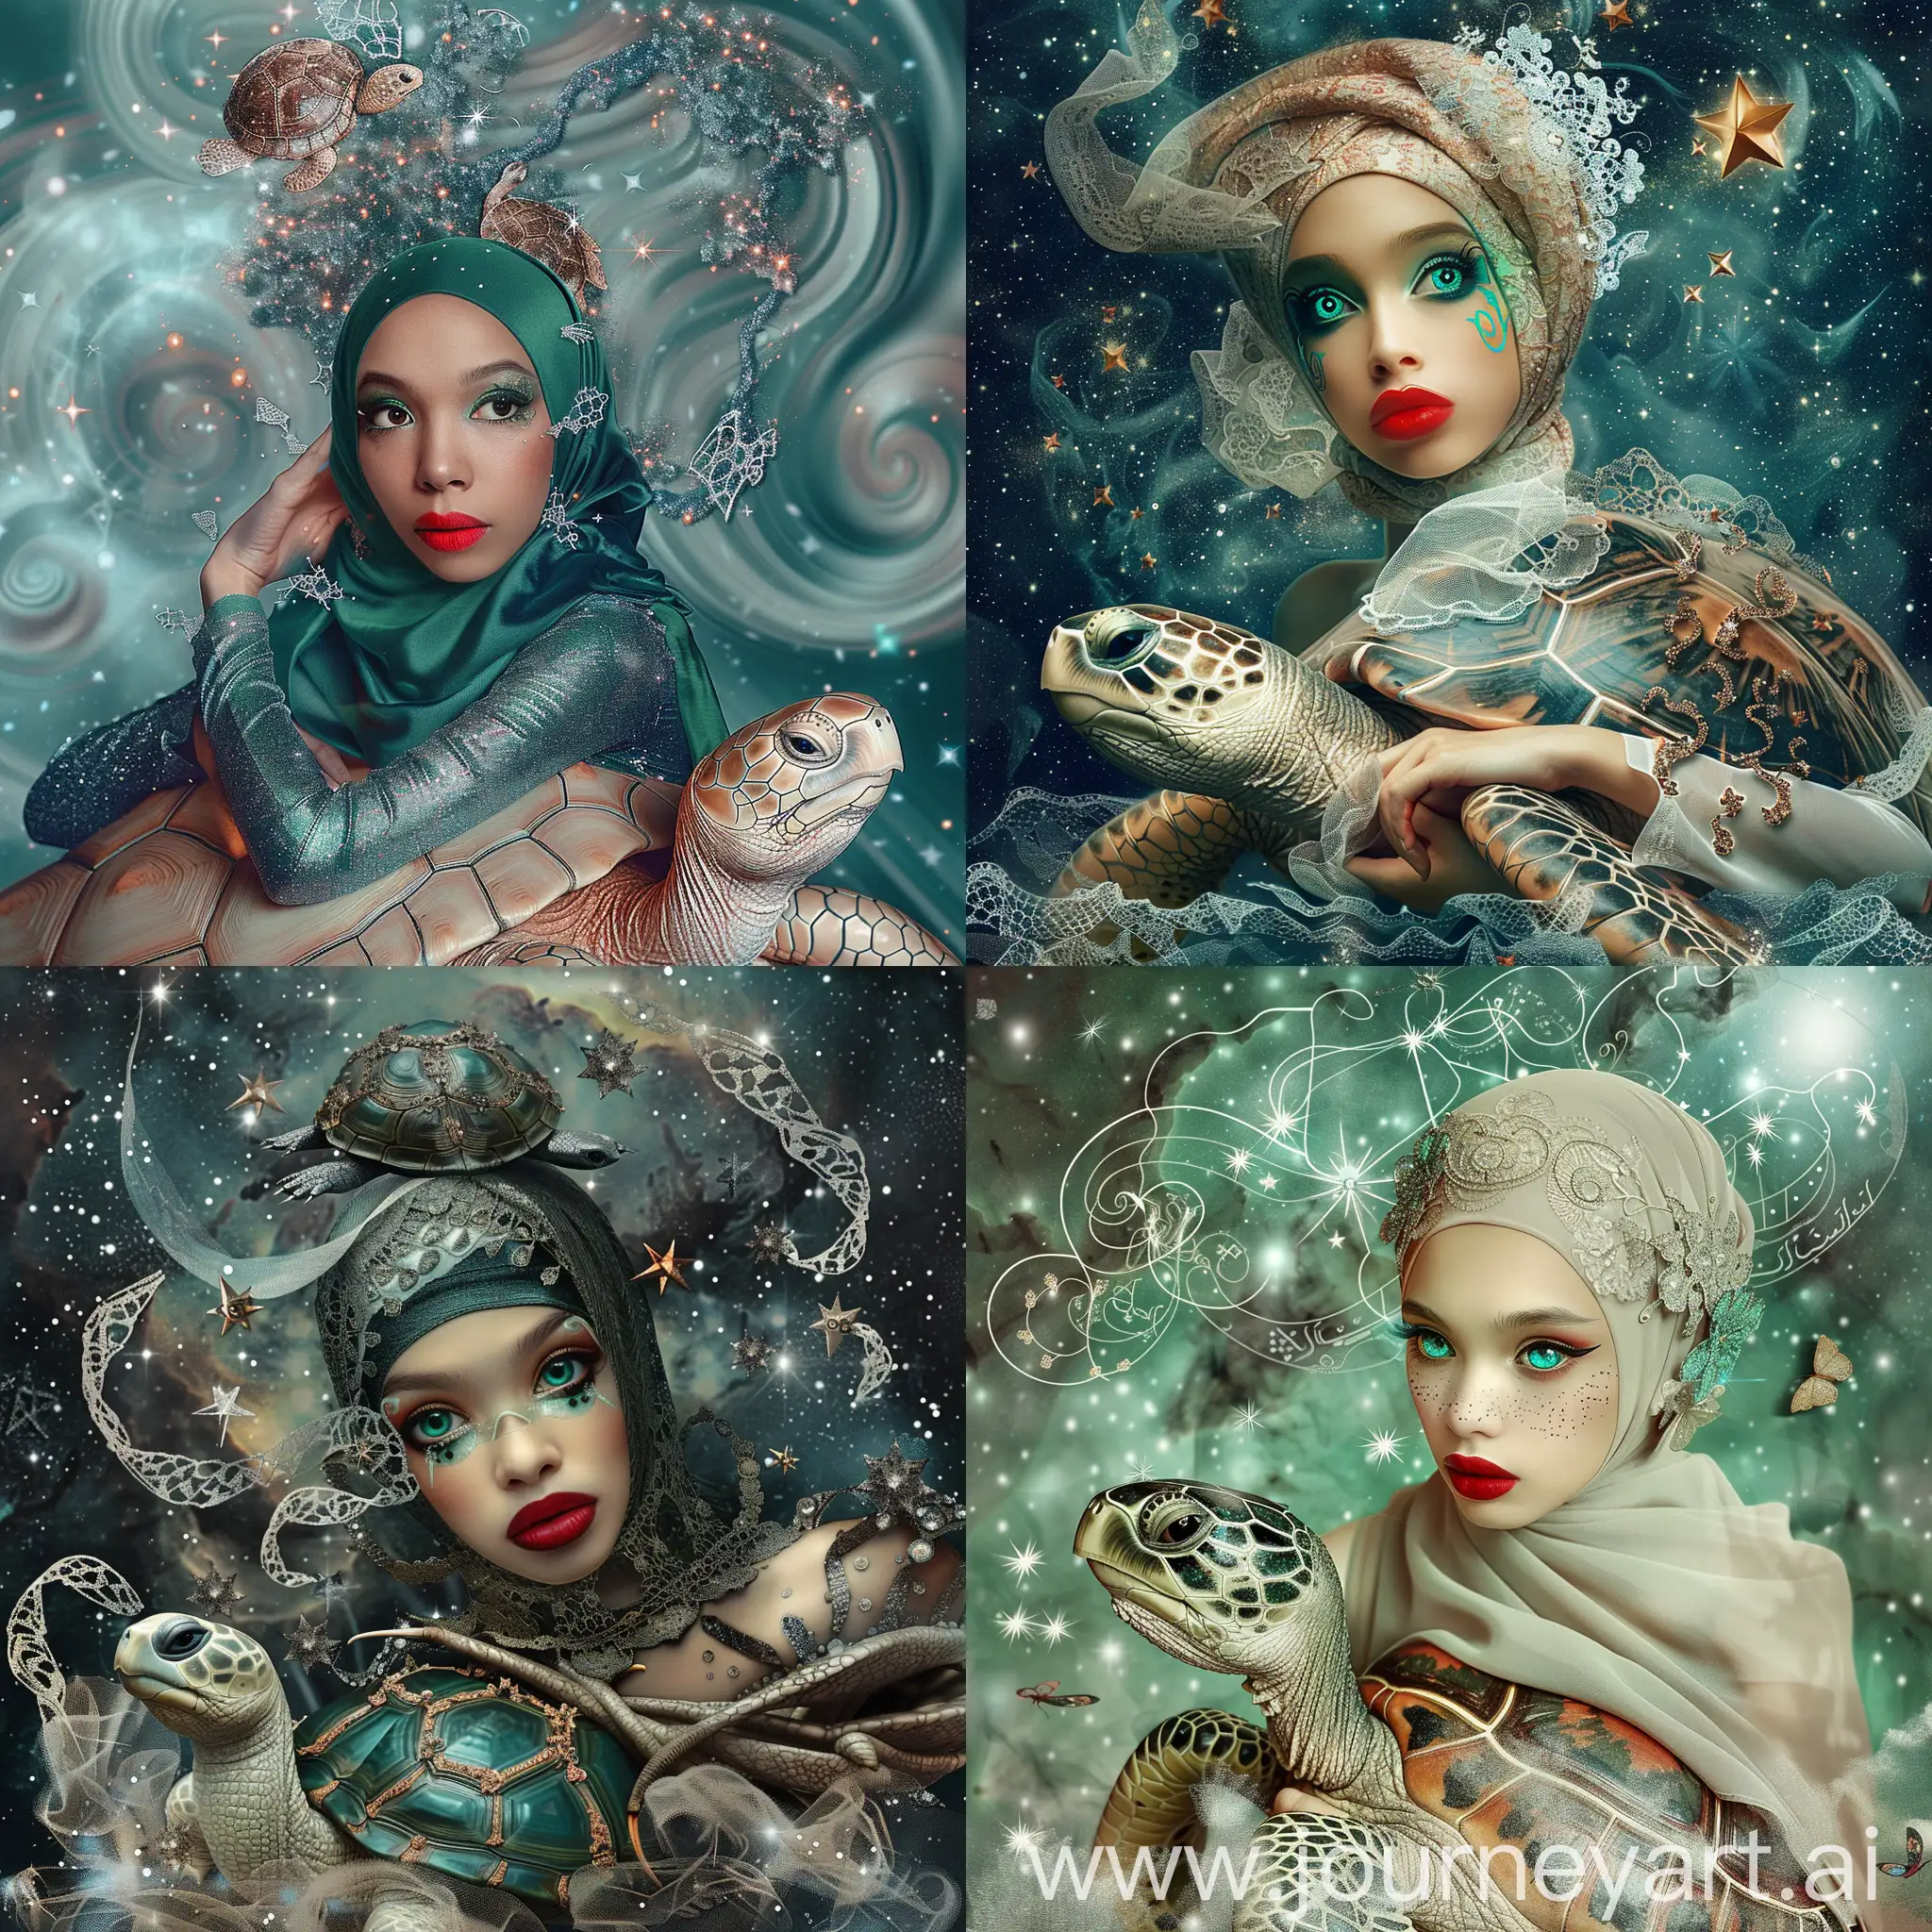 fantasy art surreal portrait of a beautiful muslimah,big malachite eyes,scarlet lips,velvety delicate skin,haute couture, sitting on a mythical turtle,with her head in a galactic digital painting with a scattering of stars and lace swirls